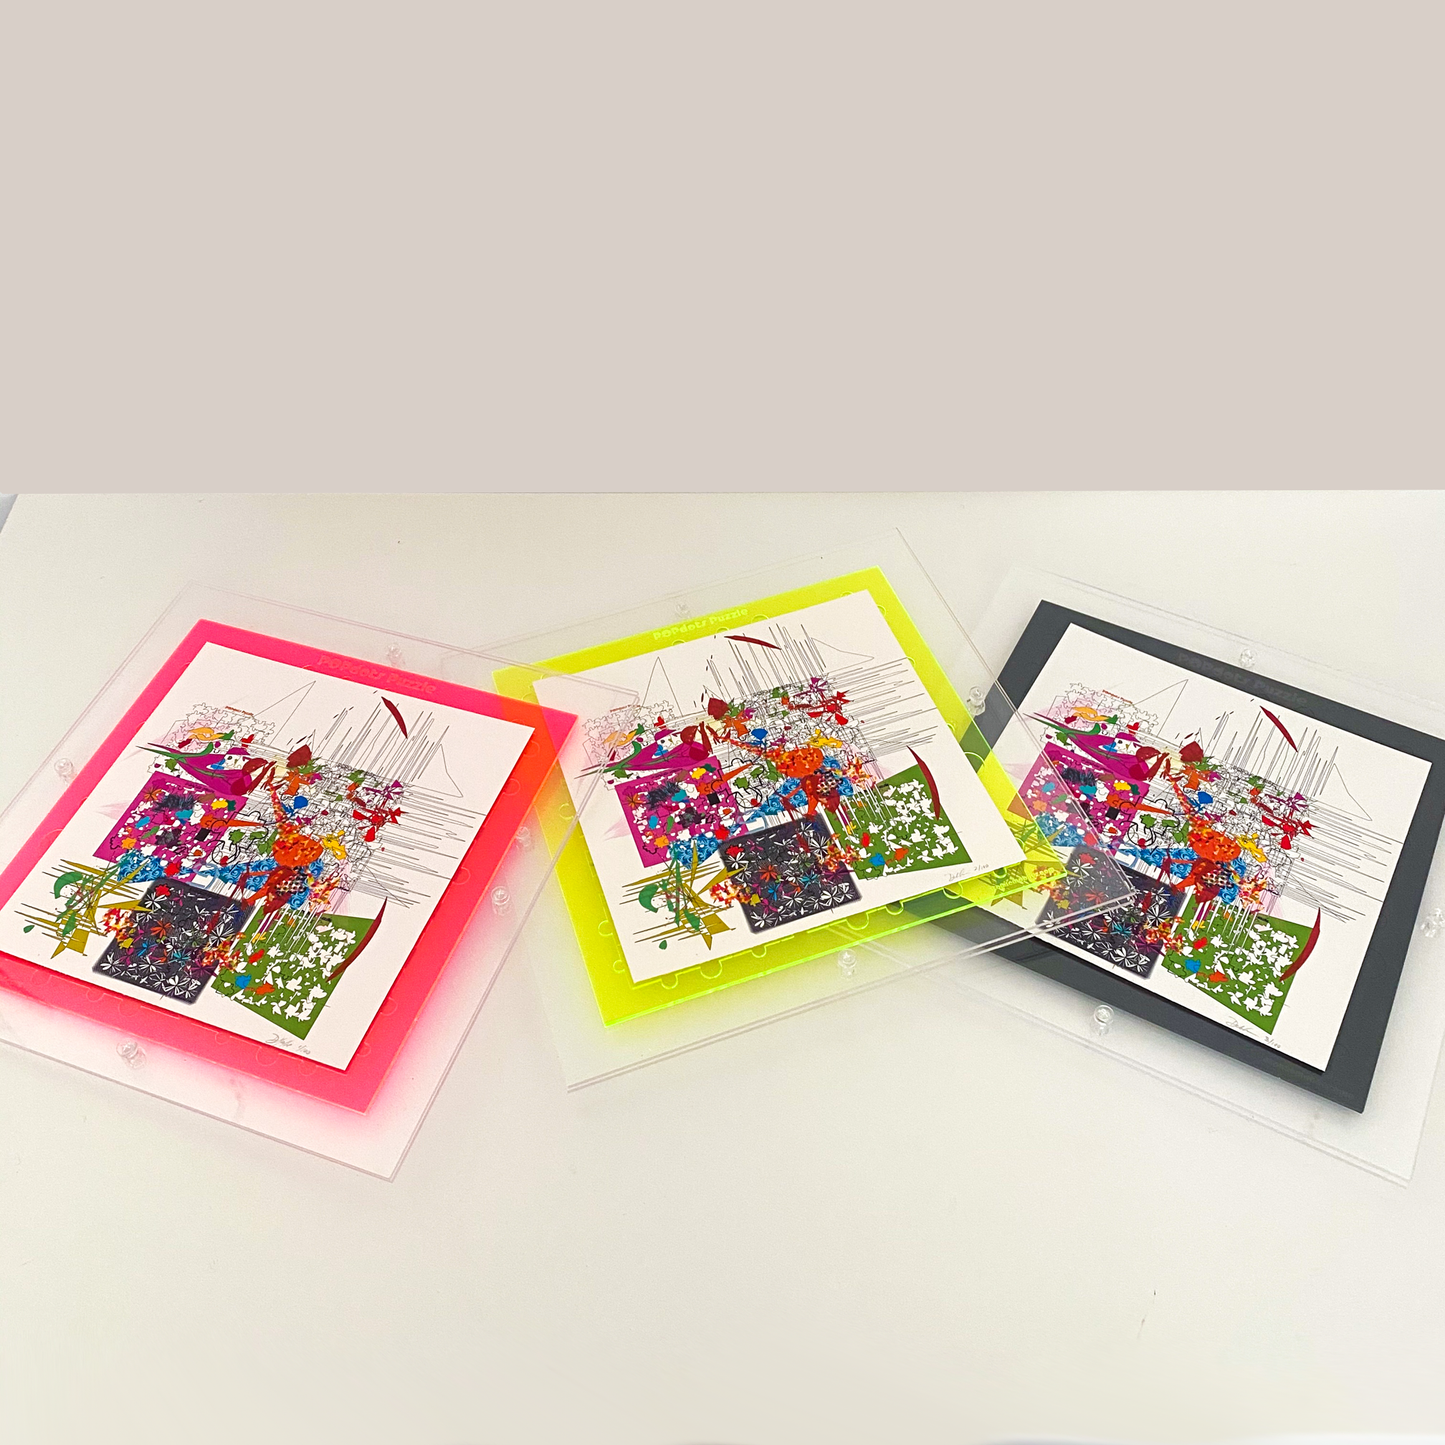 Hot Pink, Green Fluorescent Glo  & Black Jigsaw Puzzle - Limited Edition Art Piece by AtomicMobiles.com